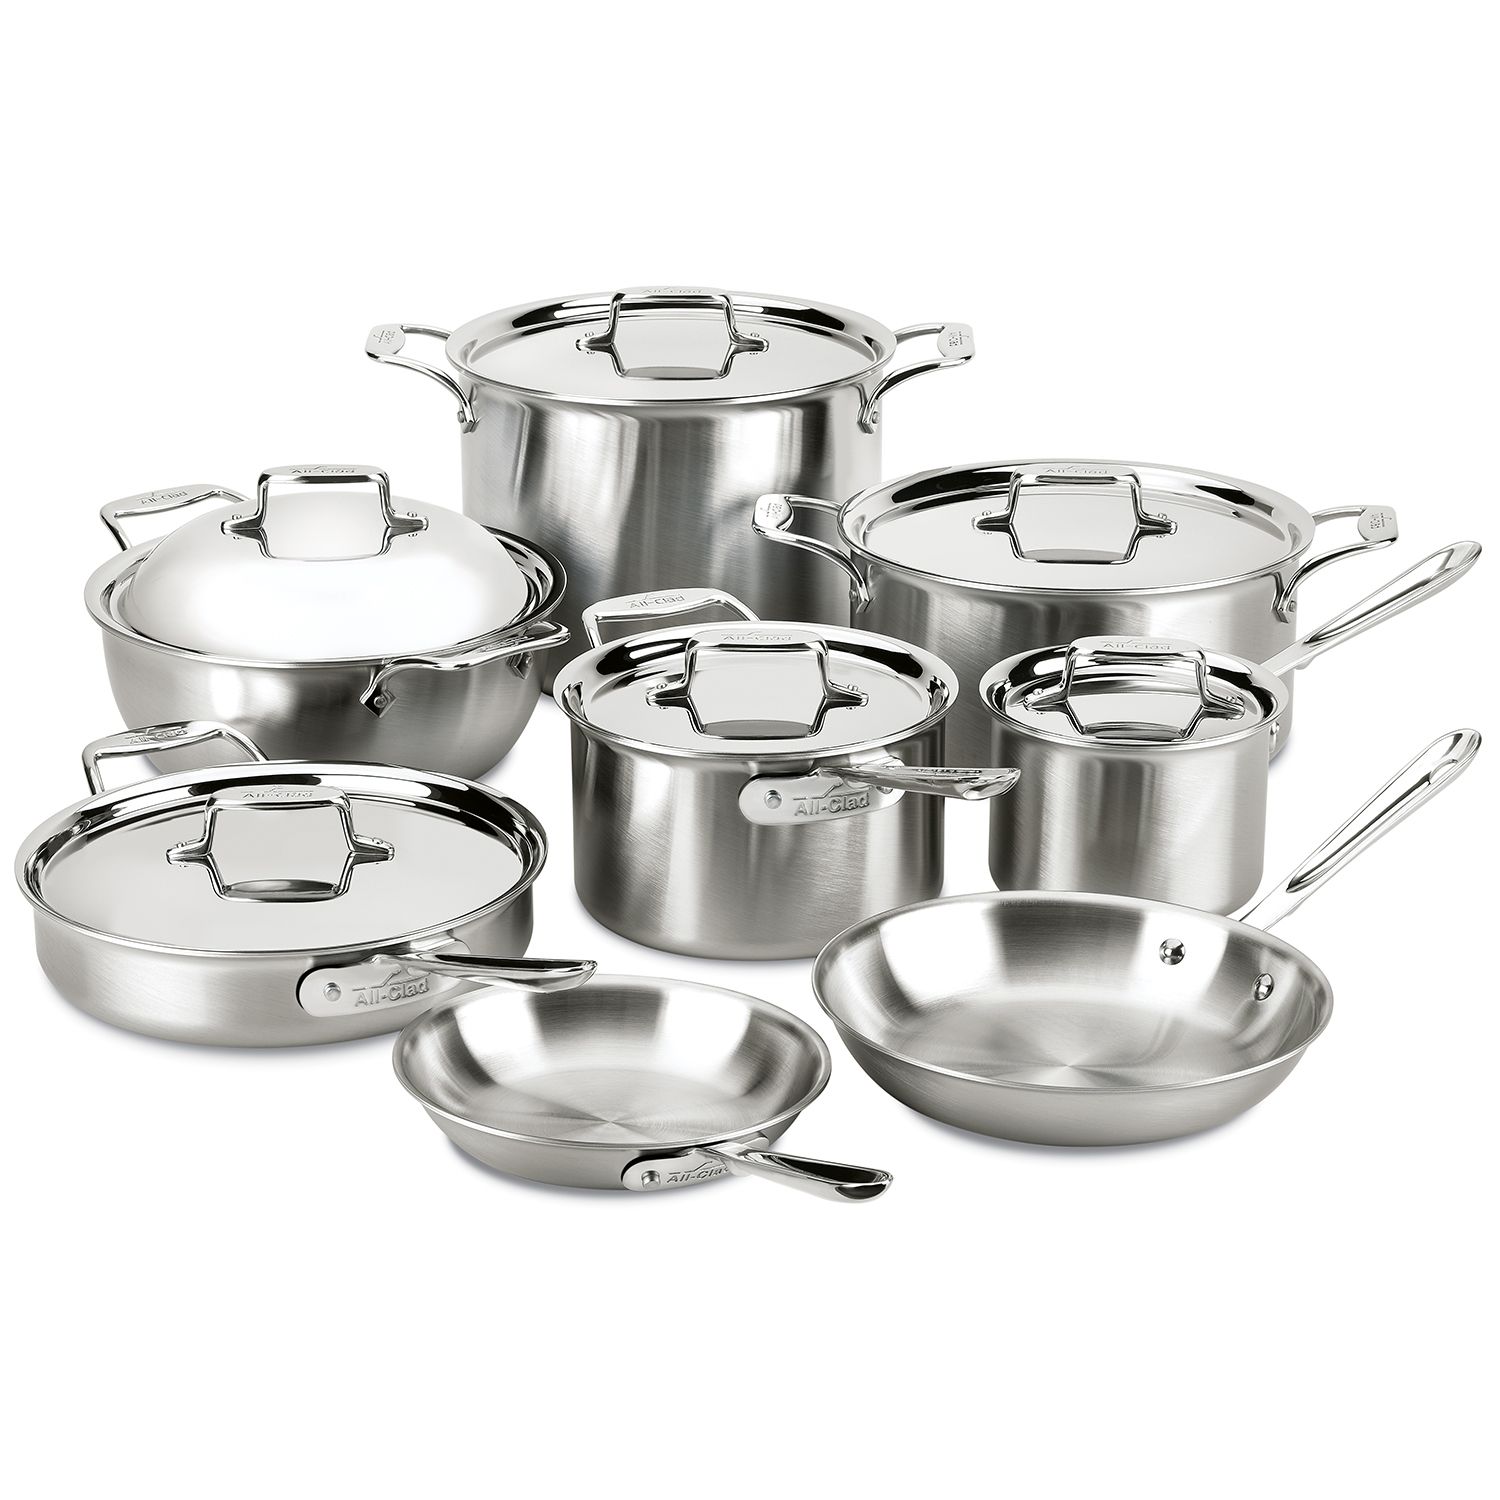 All-Clad d5 Brushed Stainless Steel 14-Piece Set | Sur La Table